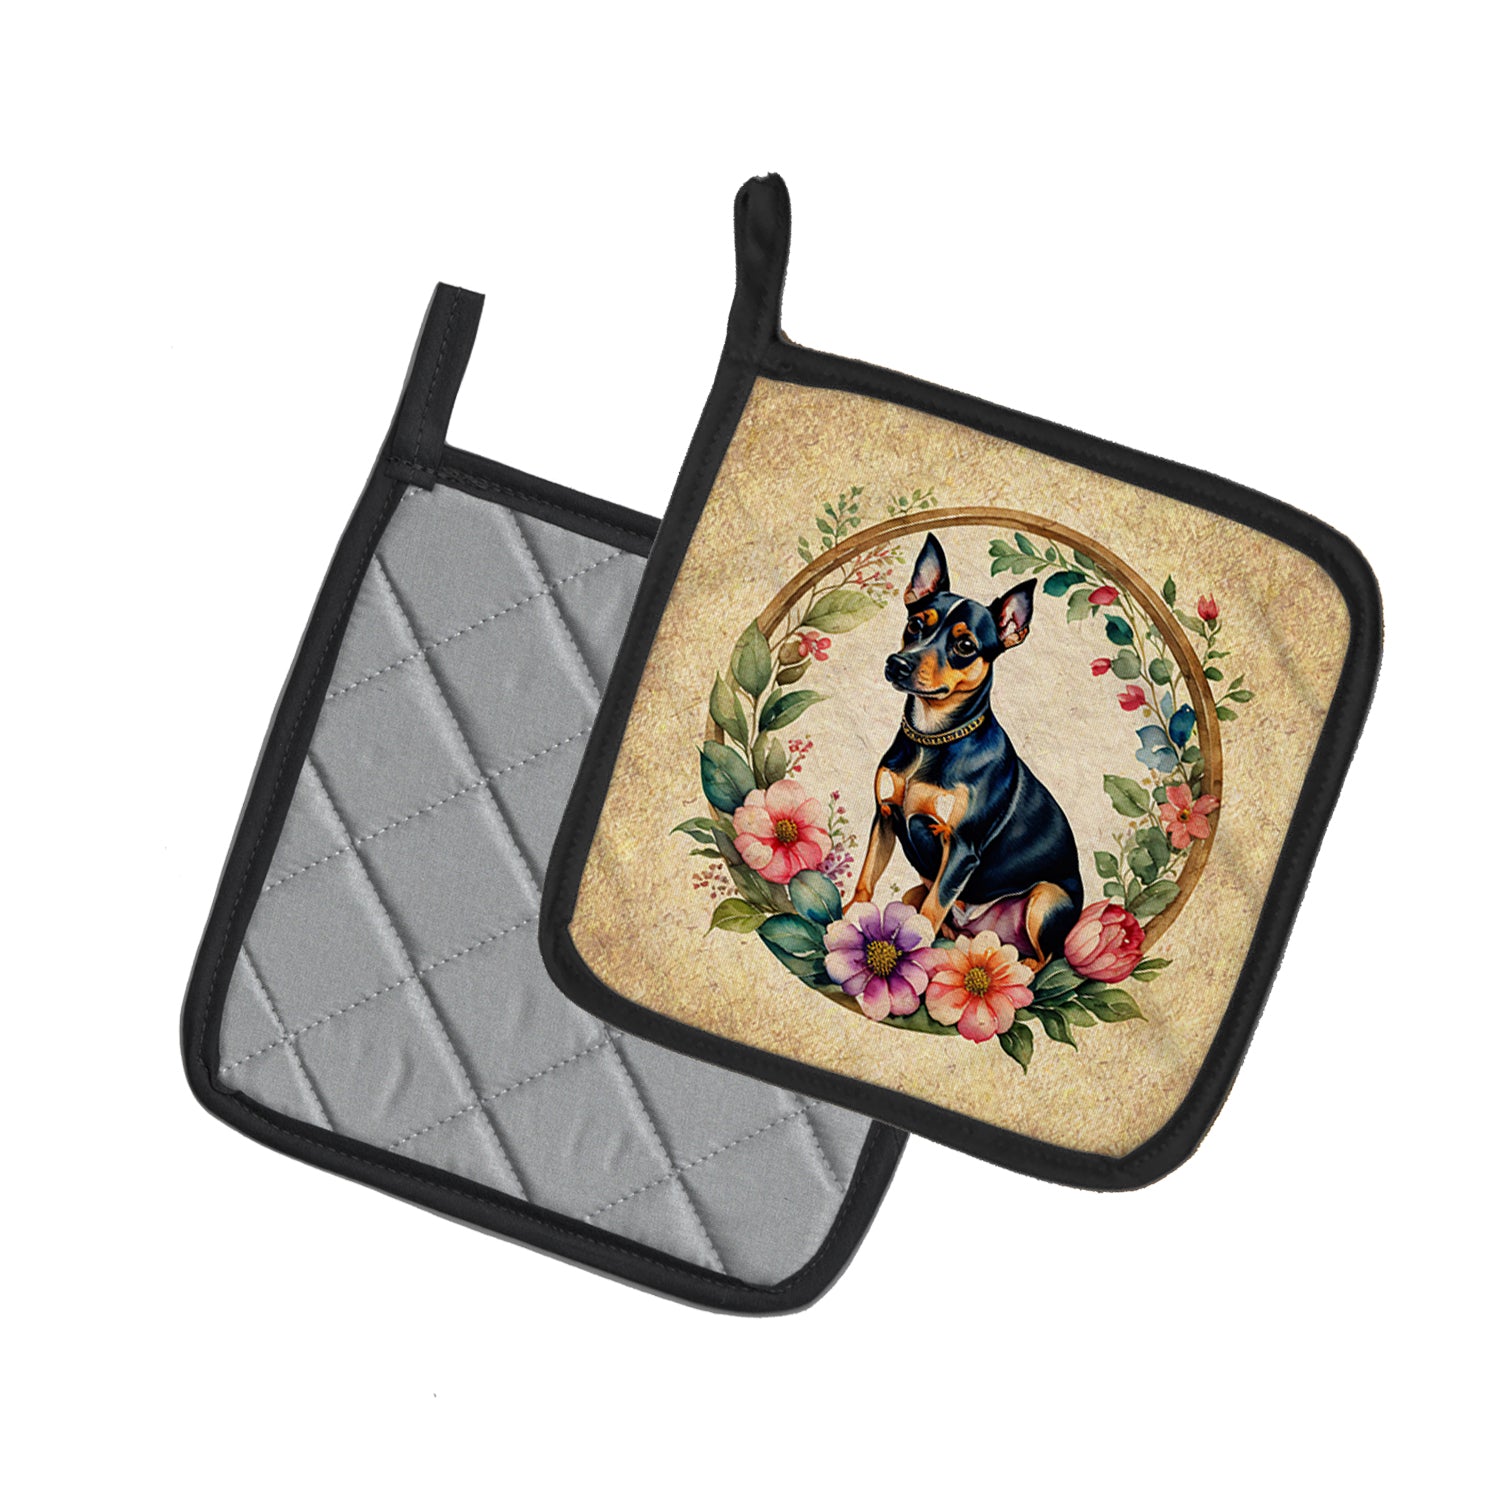 Buy this Miniature Pinscher and Flowers Pair of Pot Holders